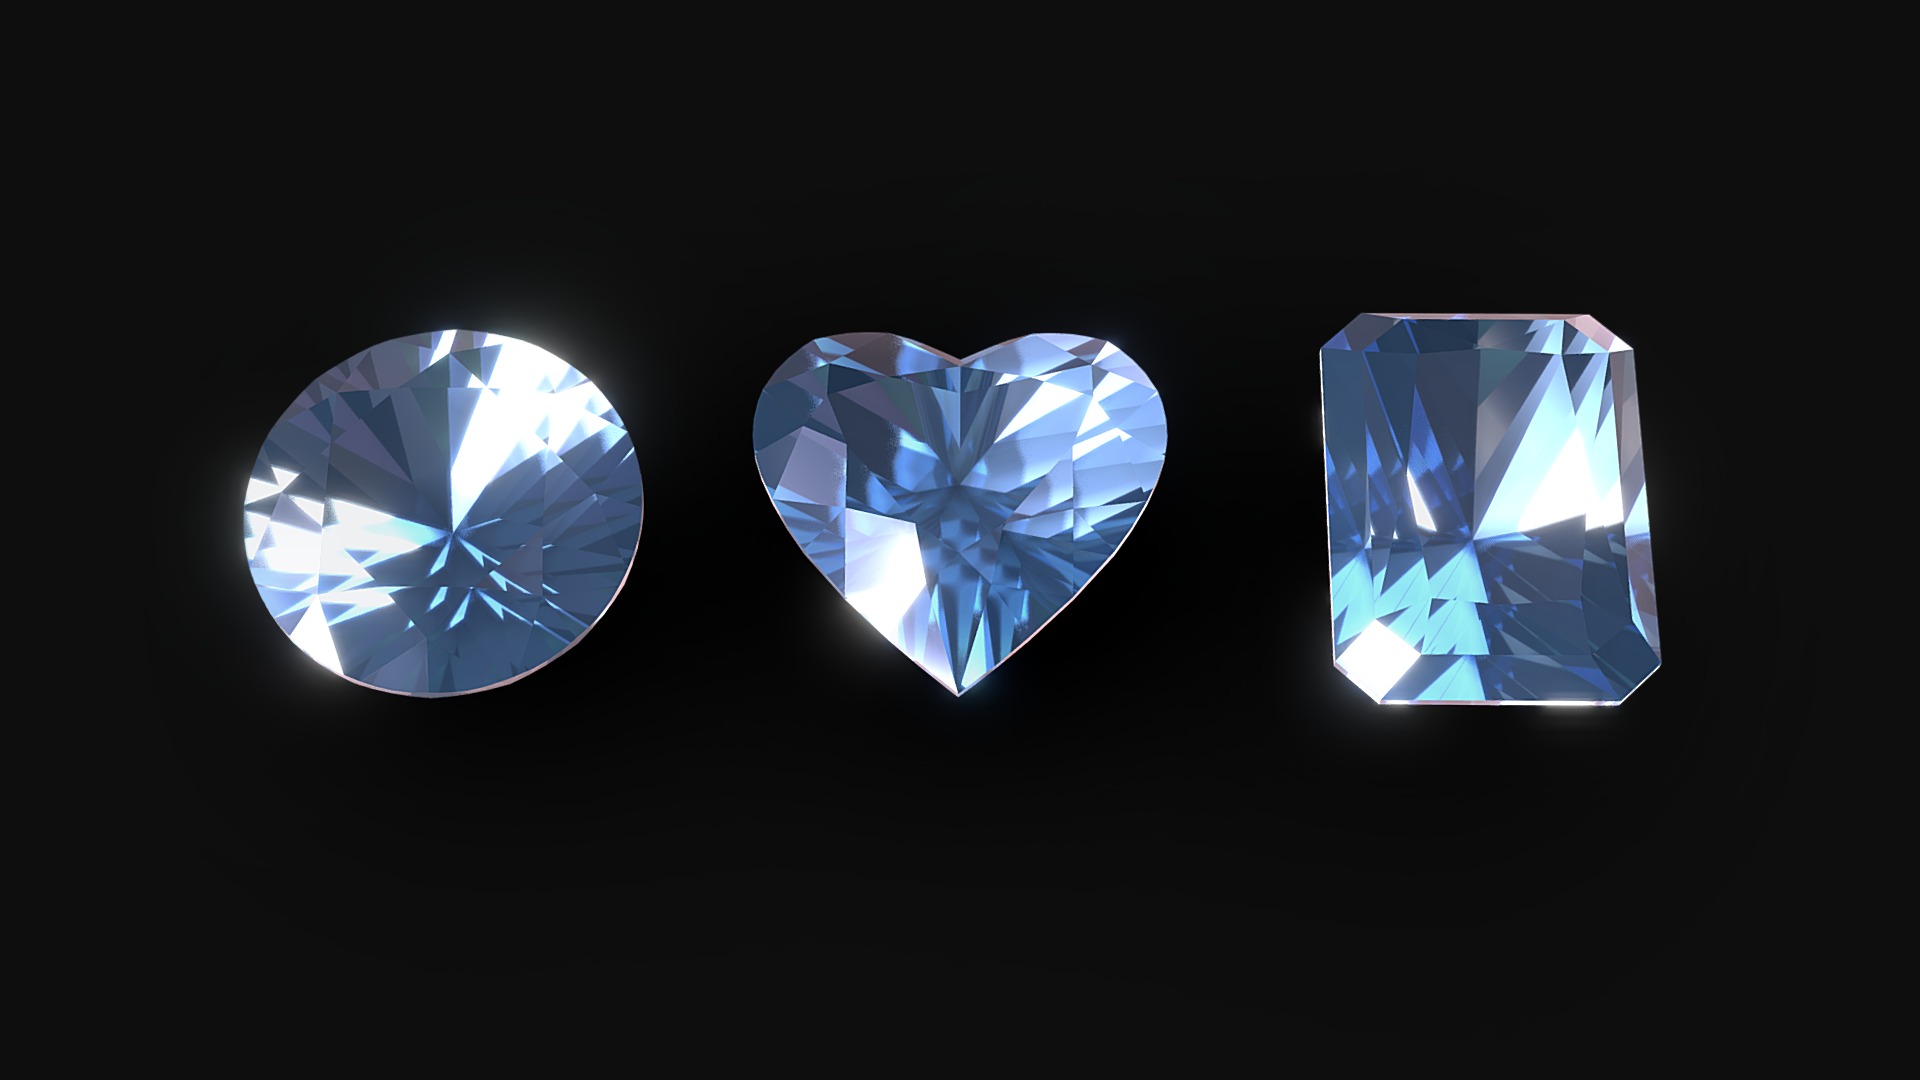 3D model Gems - This is a 3D model of the Gems. The 3D model is about a group of blue and white diamond shapes.